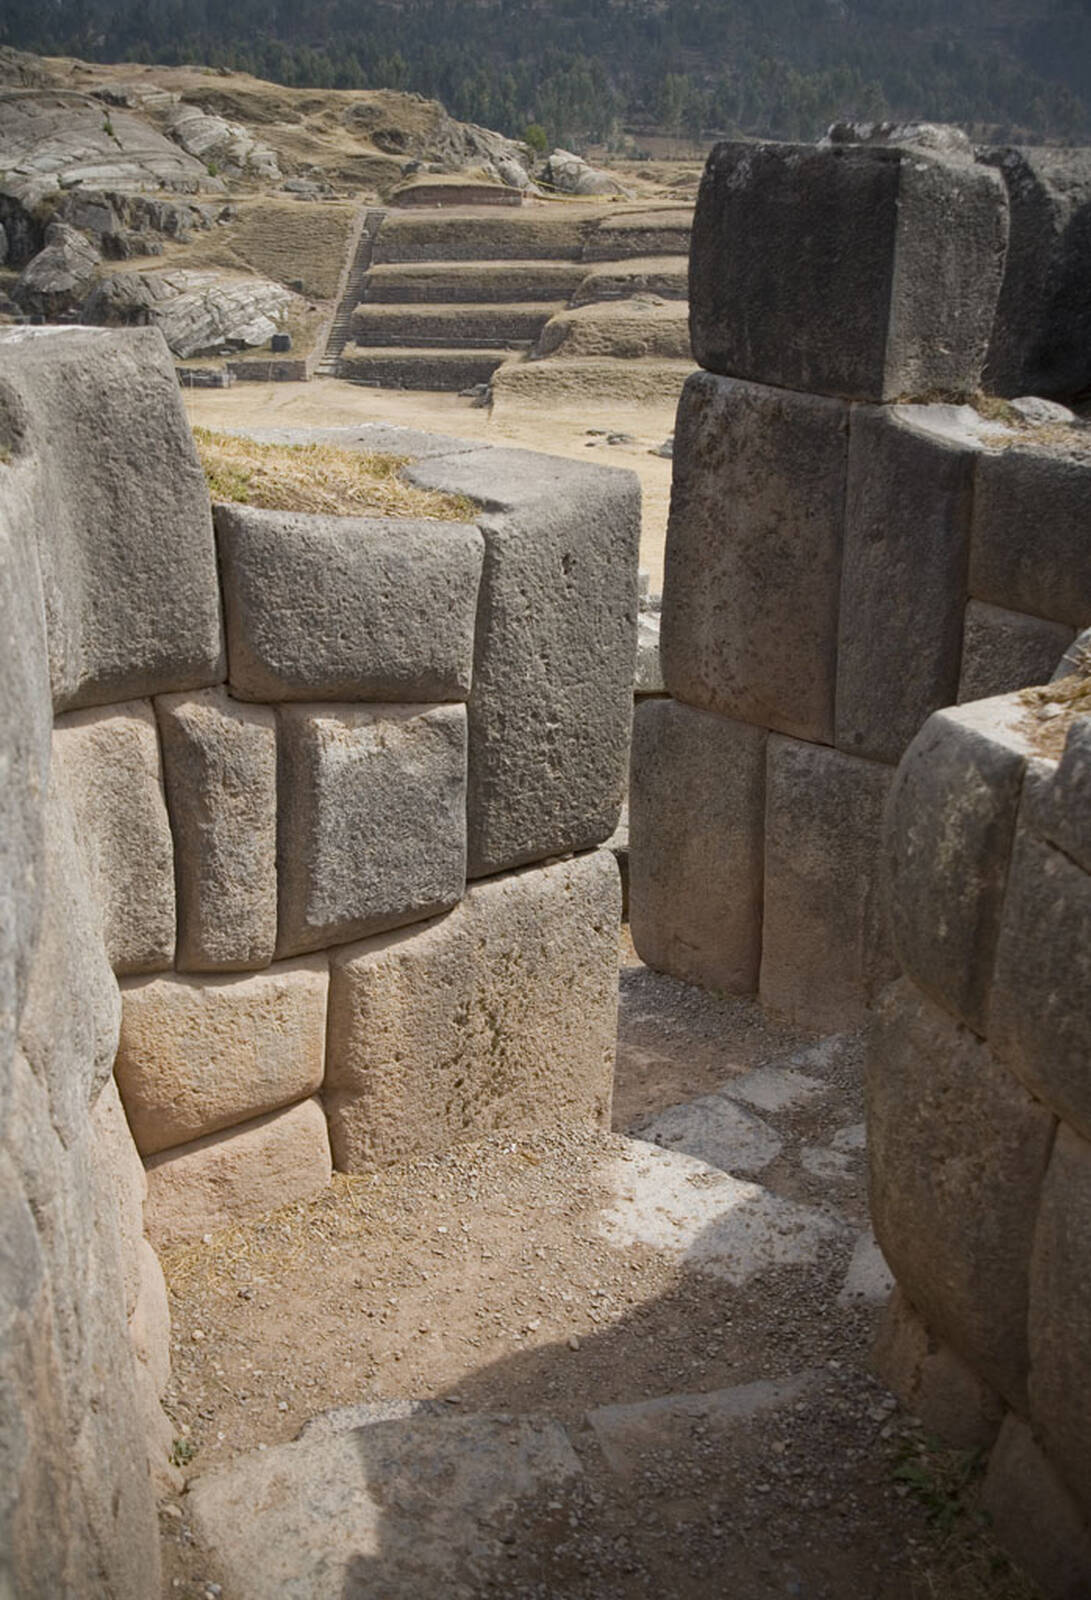 Image of The fortress of Sacsayhuaman by Darlene Hildebrandt